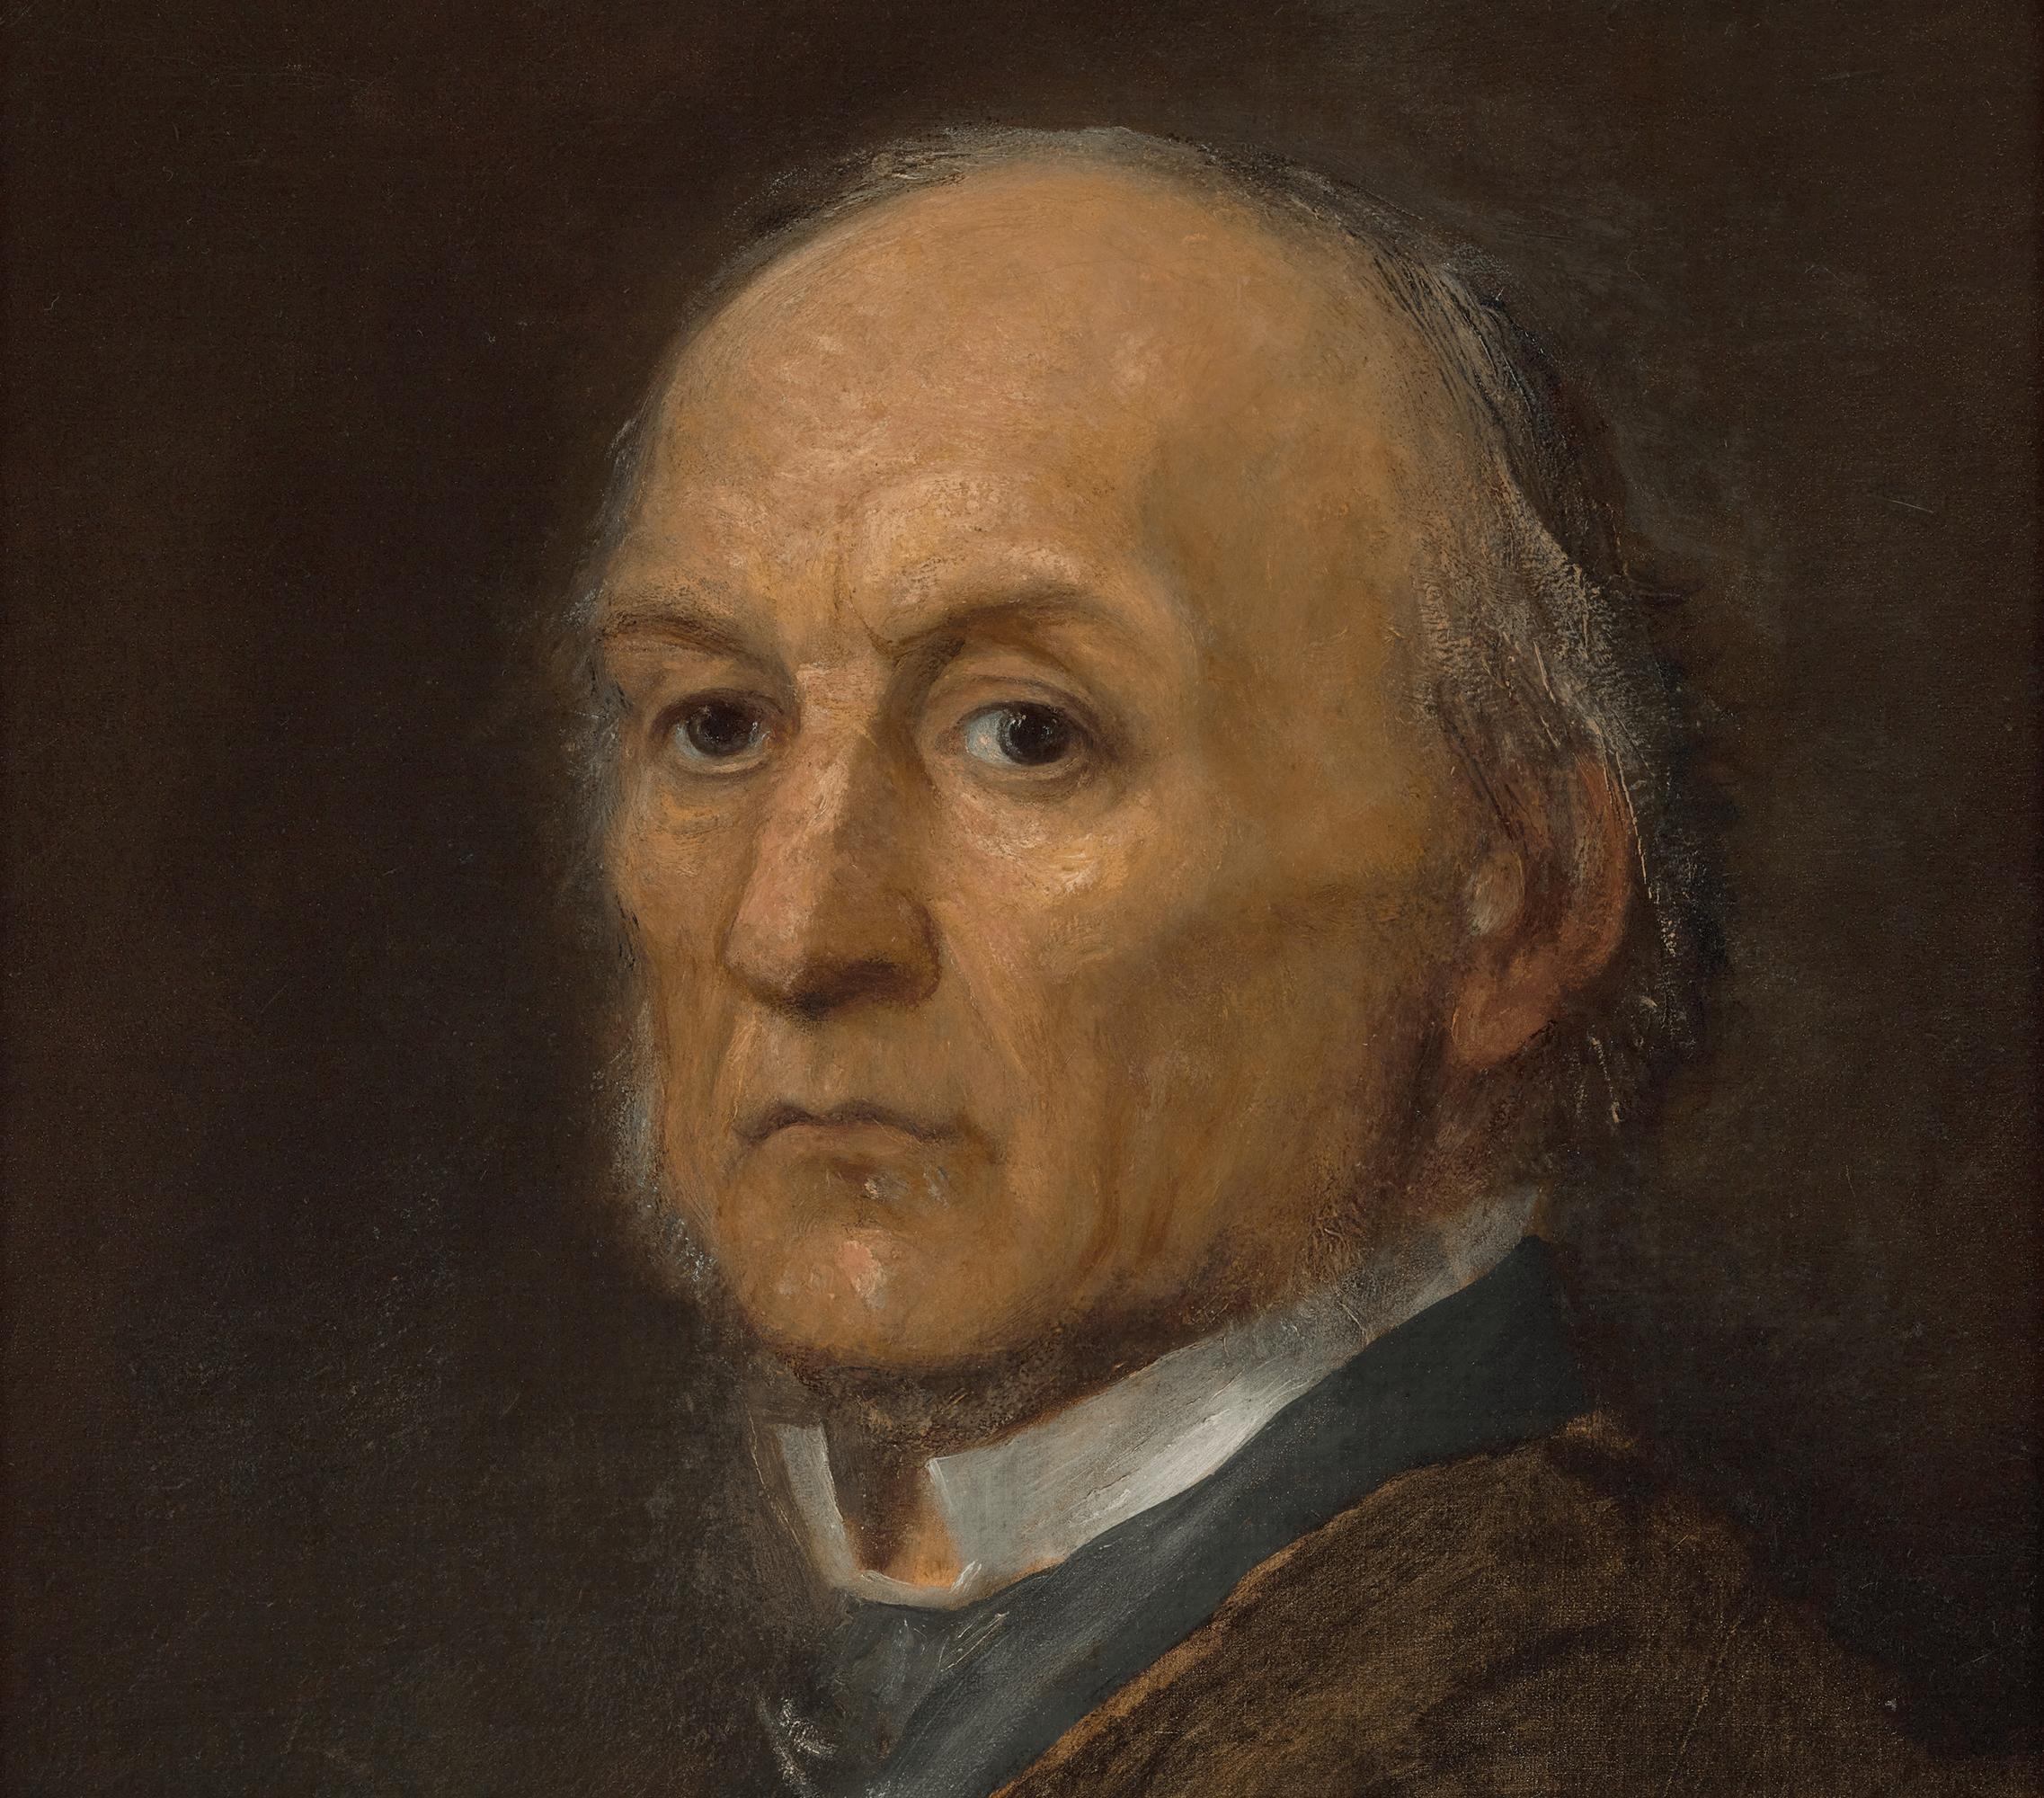 Portrait of Prime Minister William Ewart Gladstone by George Frederic Watts